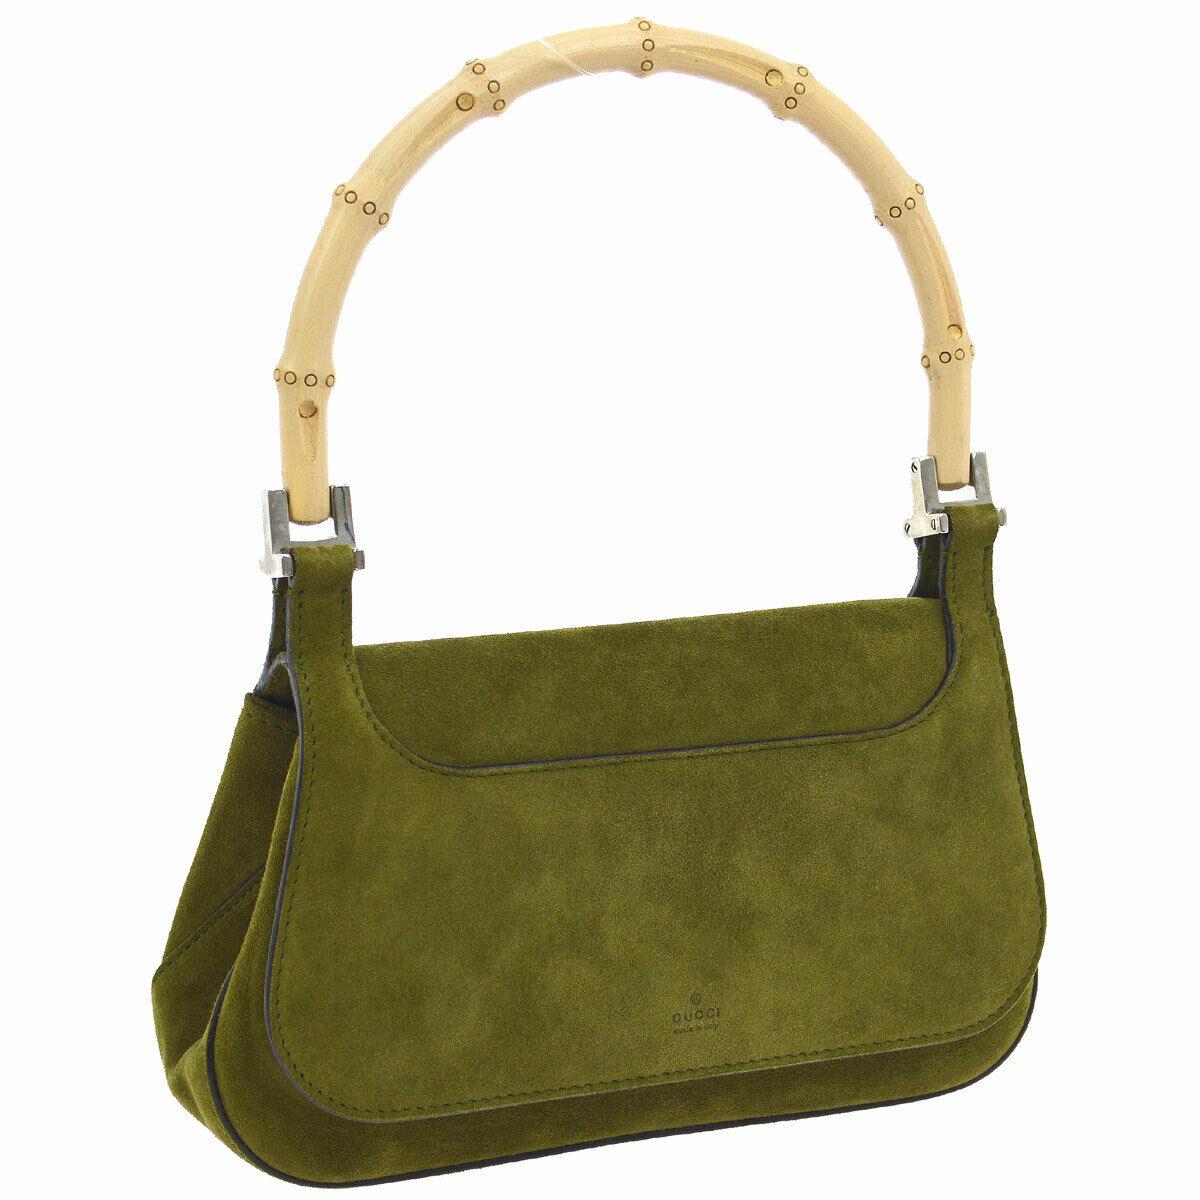 Gucci Green Suede Bamboo Top Handle Small Party Evening Satchel Bag

Suede
Bamboo
Silver tone hardware
Woven lining
Made in Italy
Handle drop 5